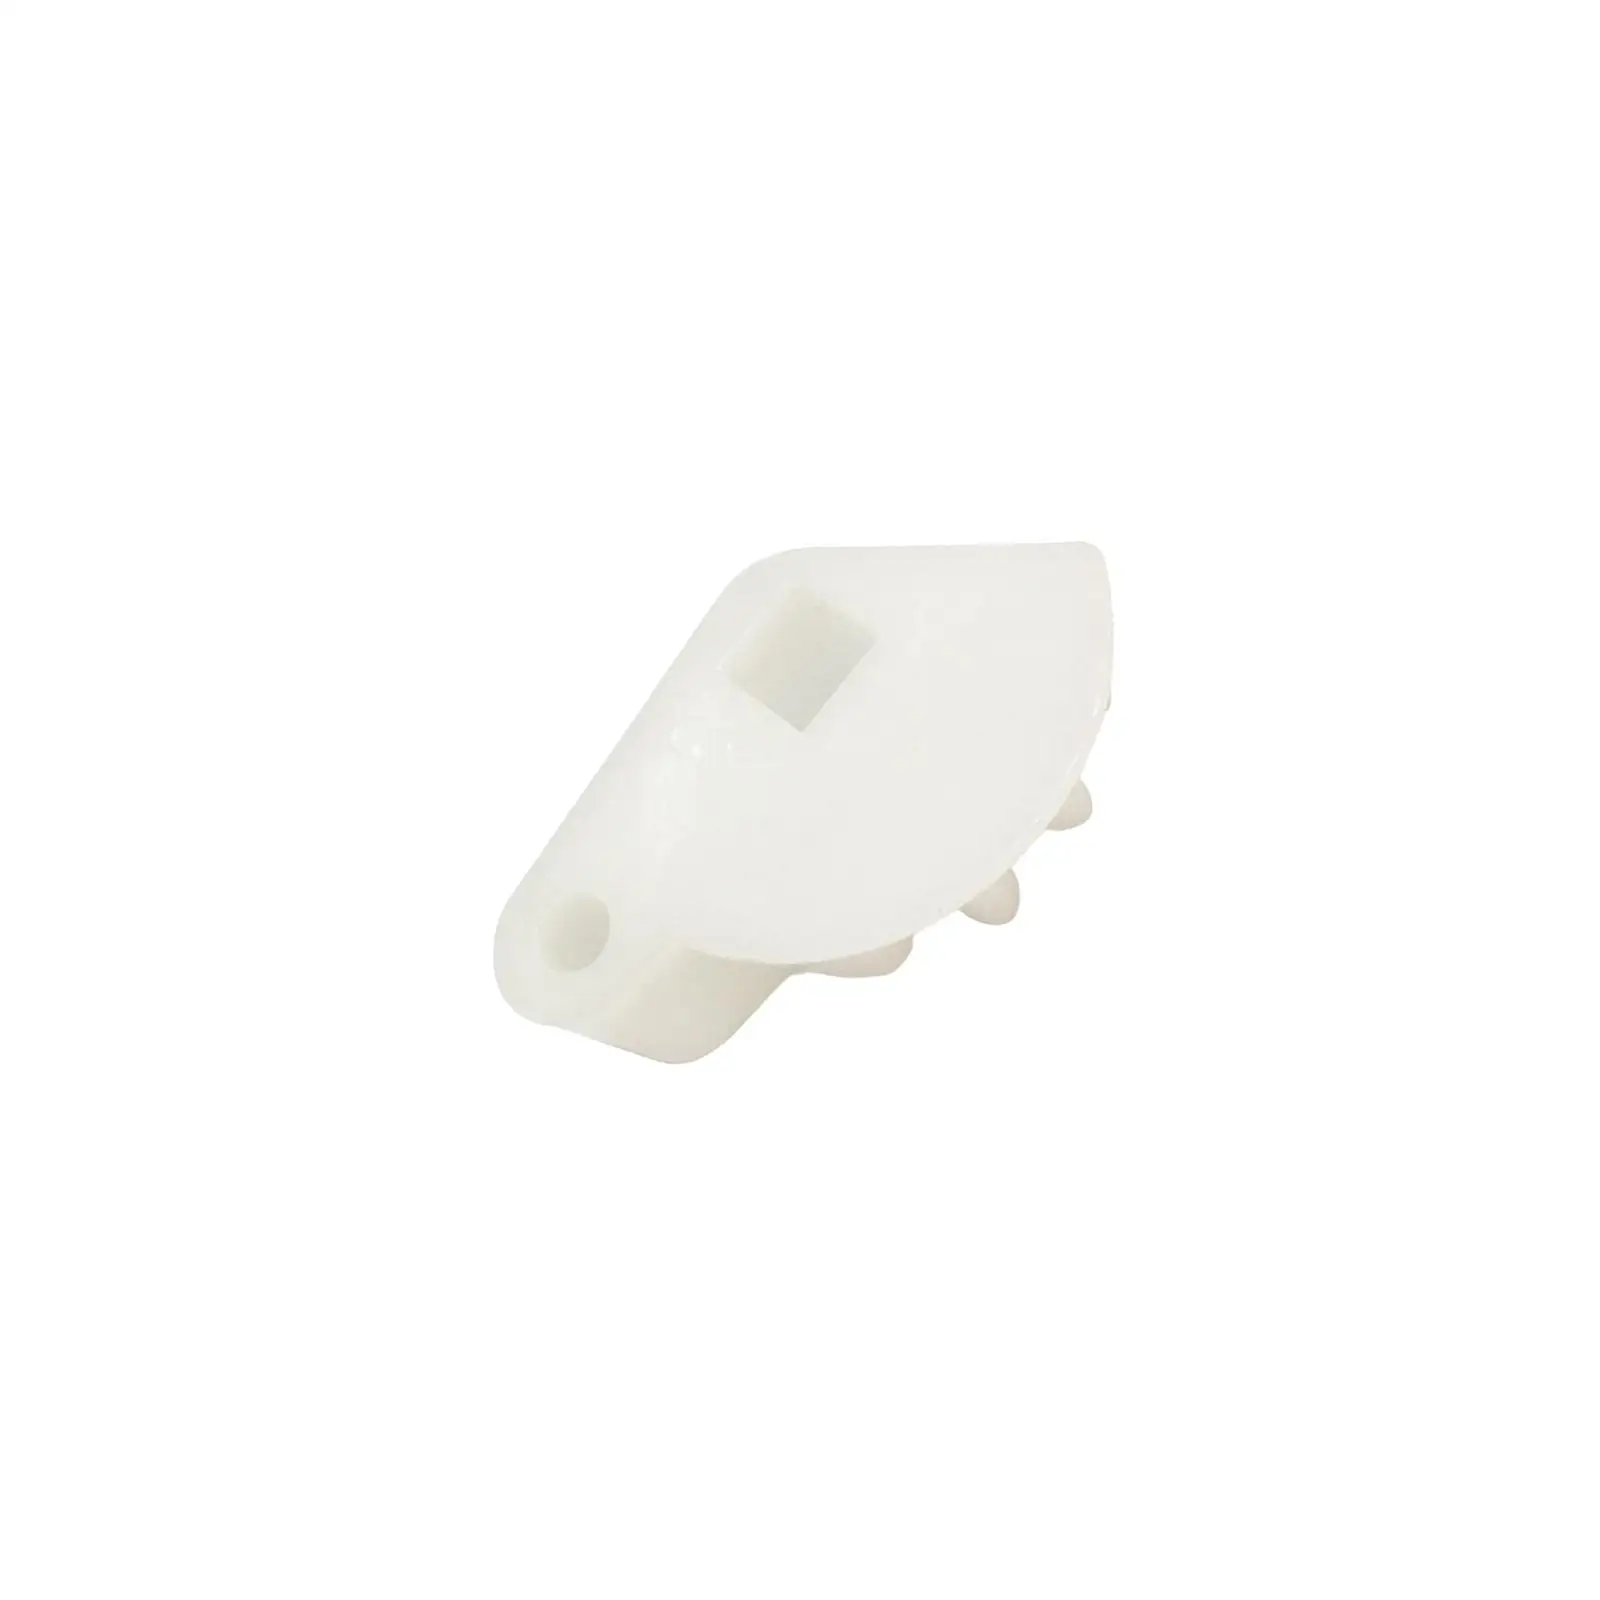 Shift Rod Lever 3B2-66225 for Tohatsu Outboard Motor Direct Replacement White Vehicle Spare Parts Easily Install